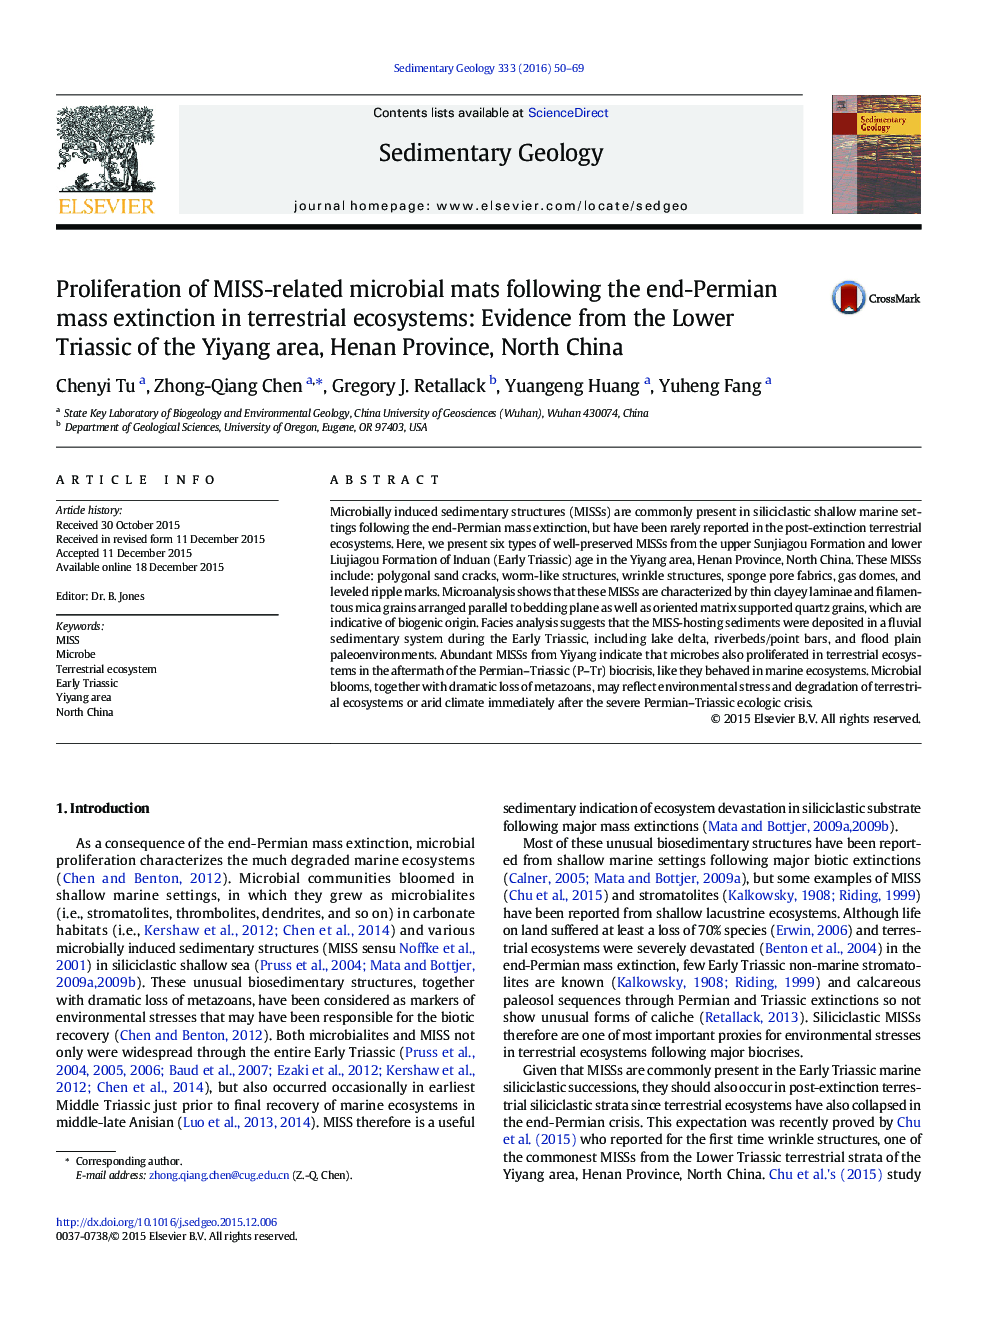 Proliferation of MISS-related microbial mats following the end-Permian mass extinction in terrestrial ecosystems: Evidence from the Lower Triassic of the Yiyang area, Henan Province, North China